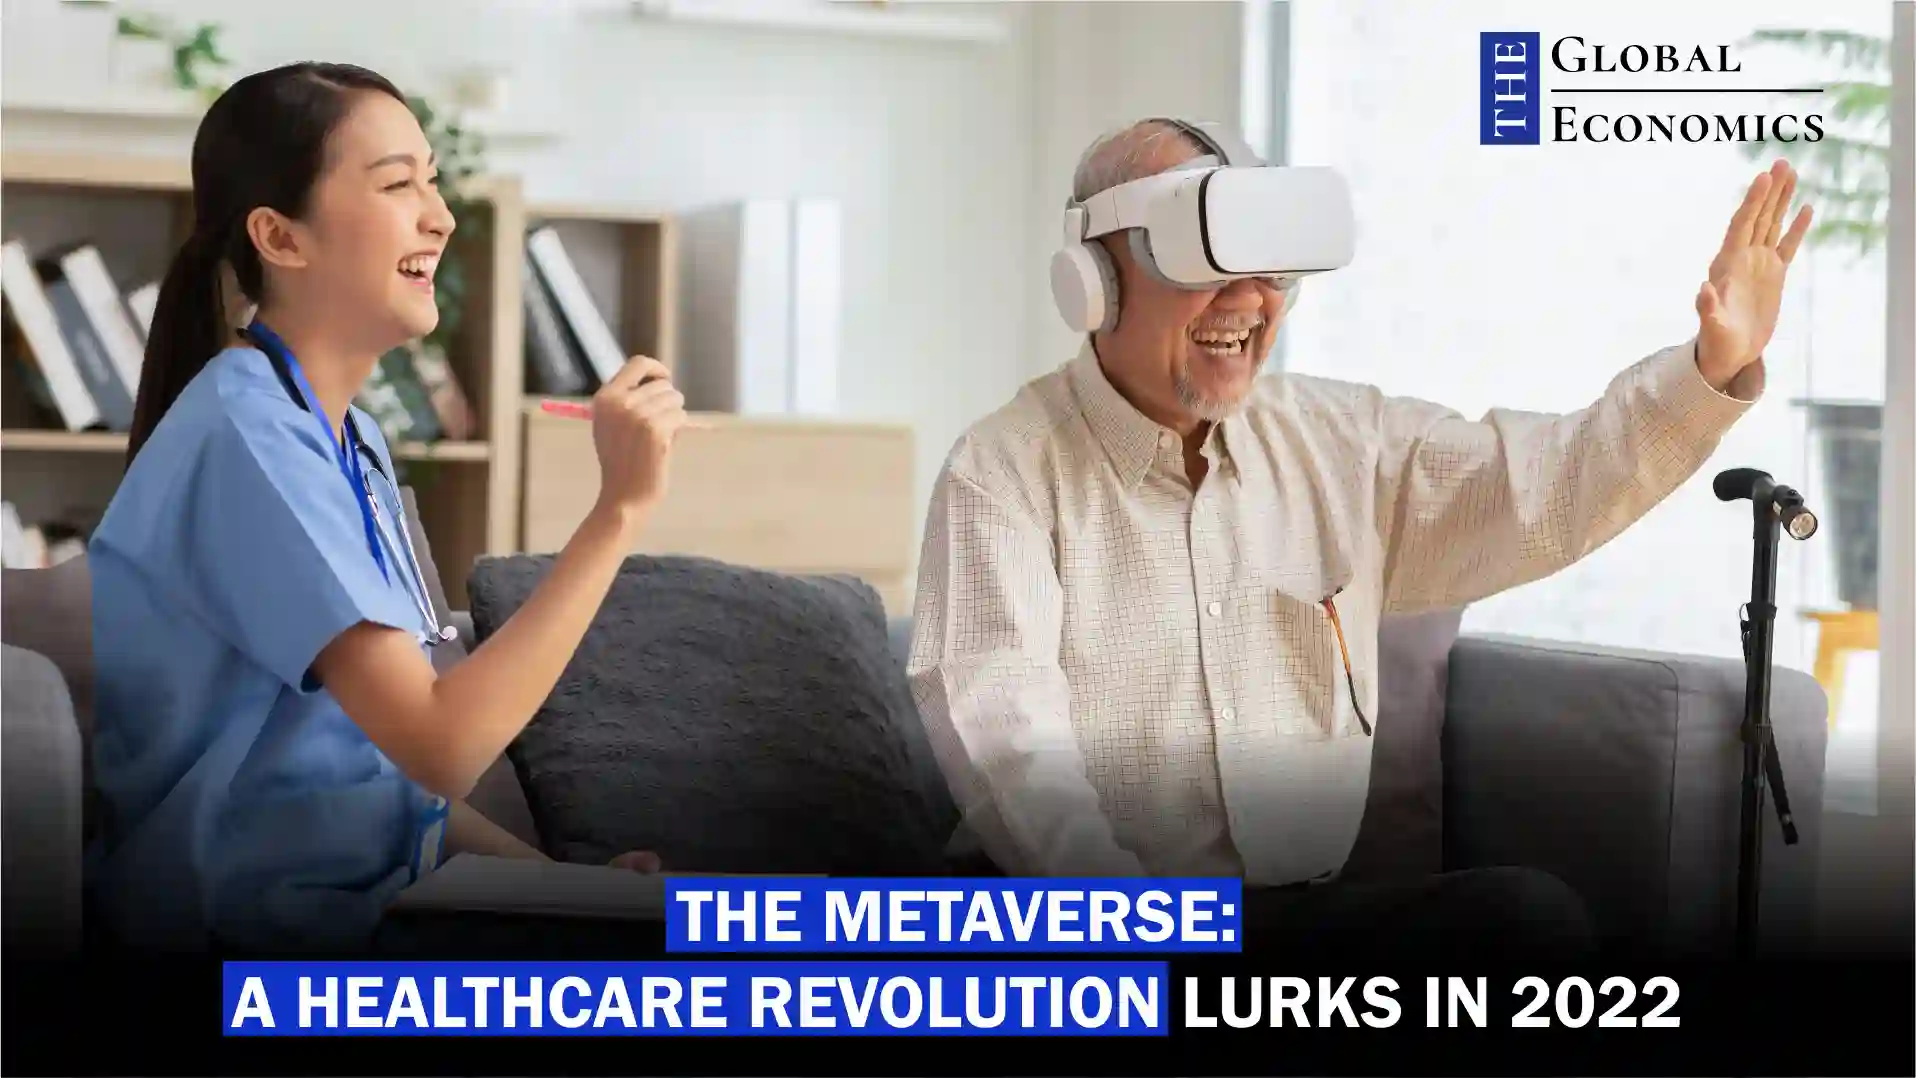 The Metaverse: A Healthcare Revolution Lurks in 2022